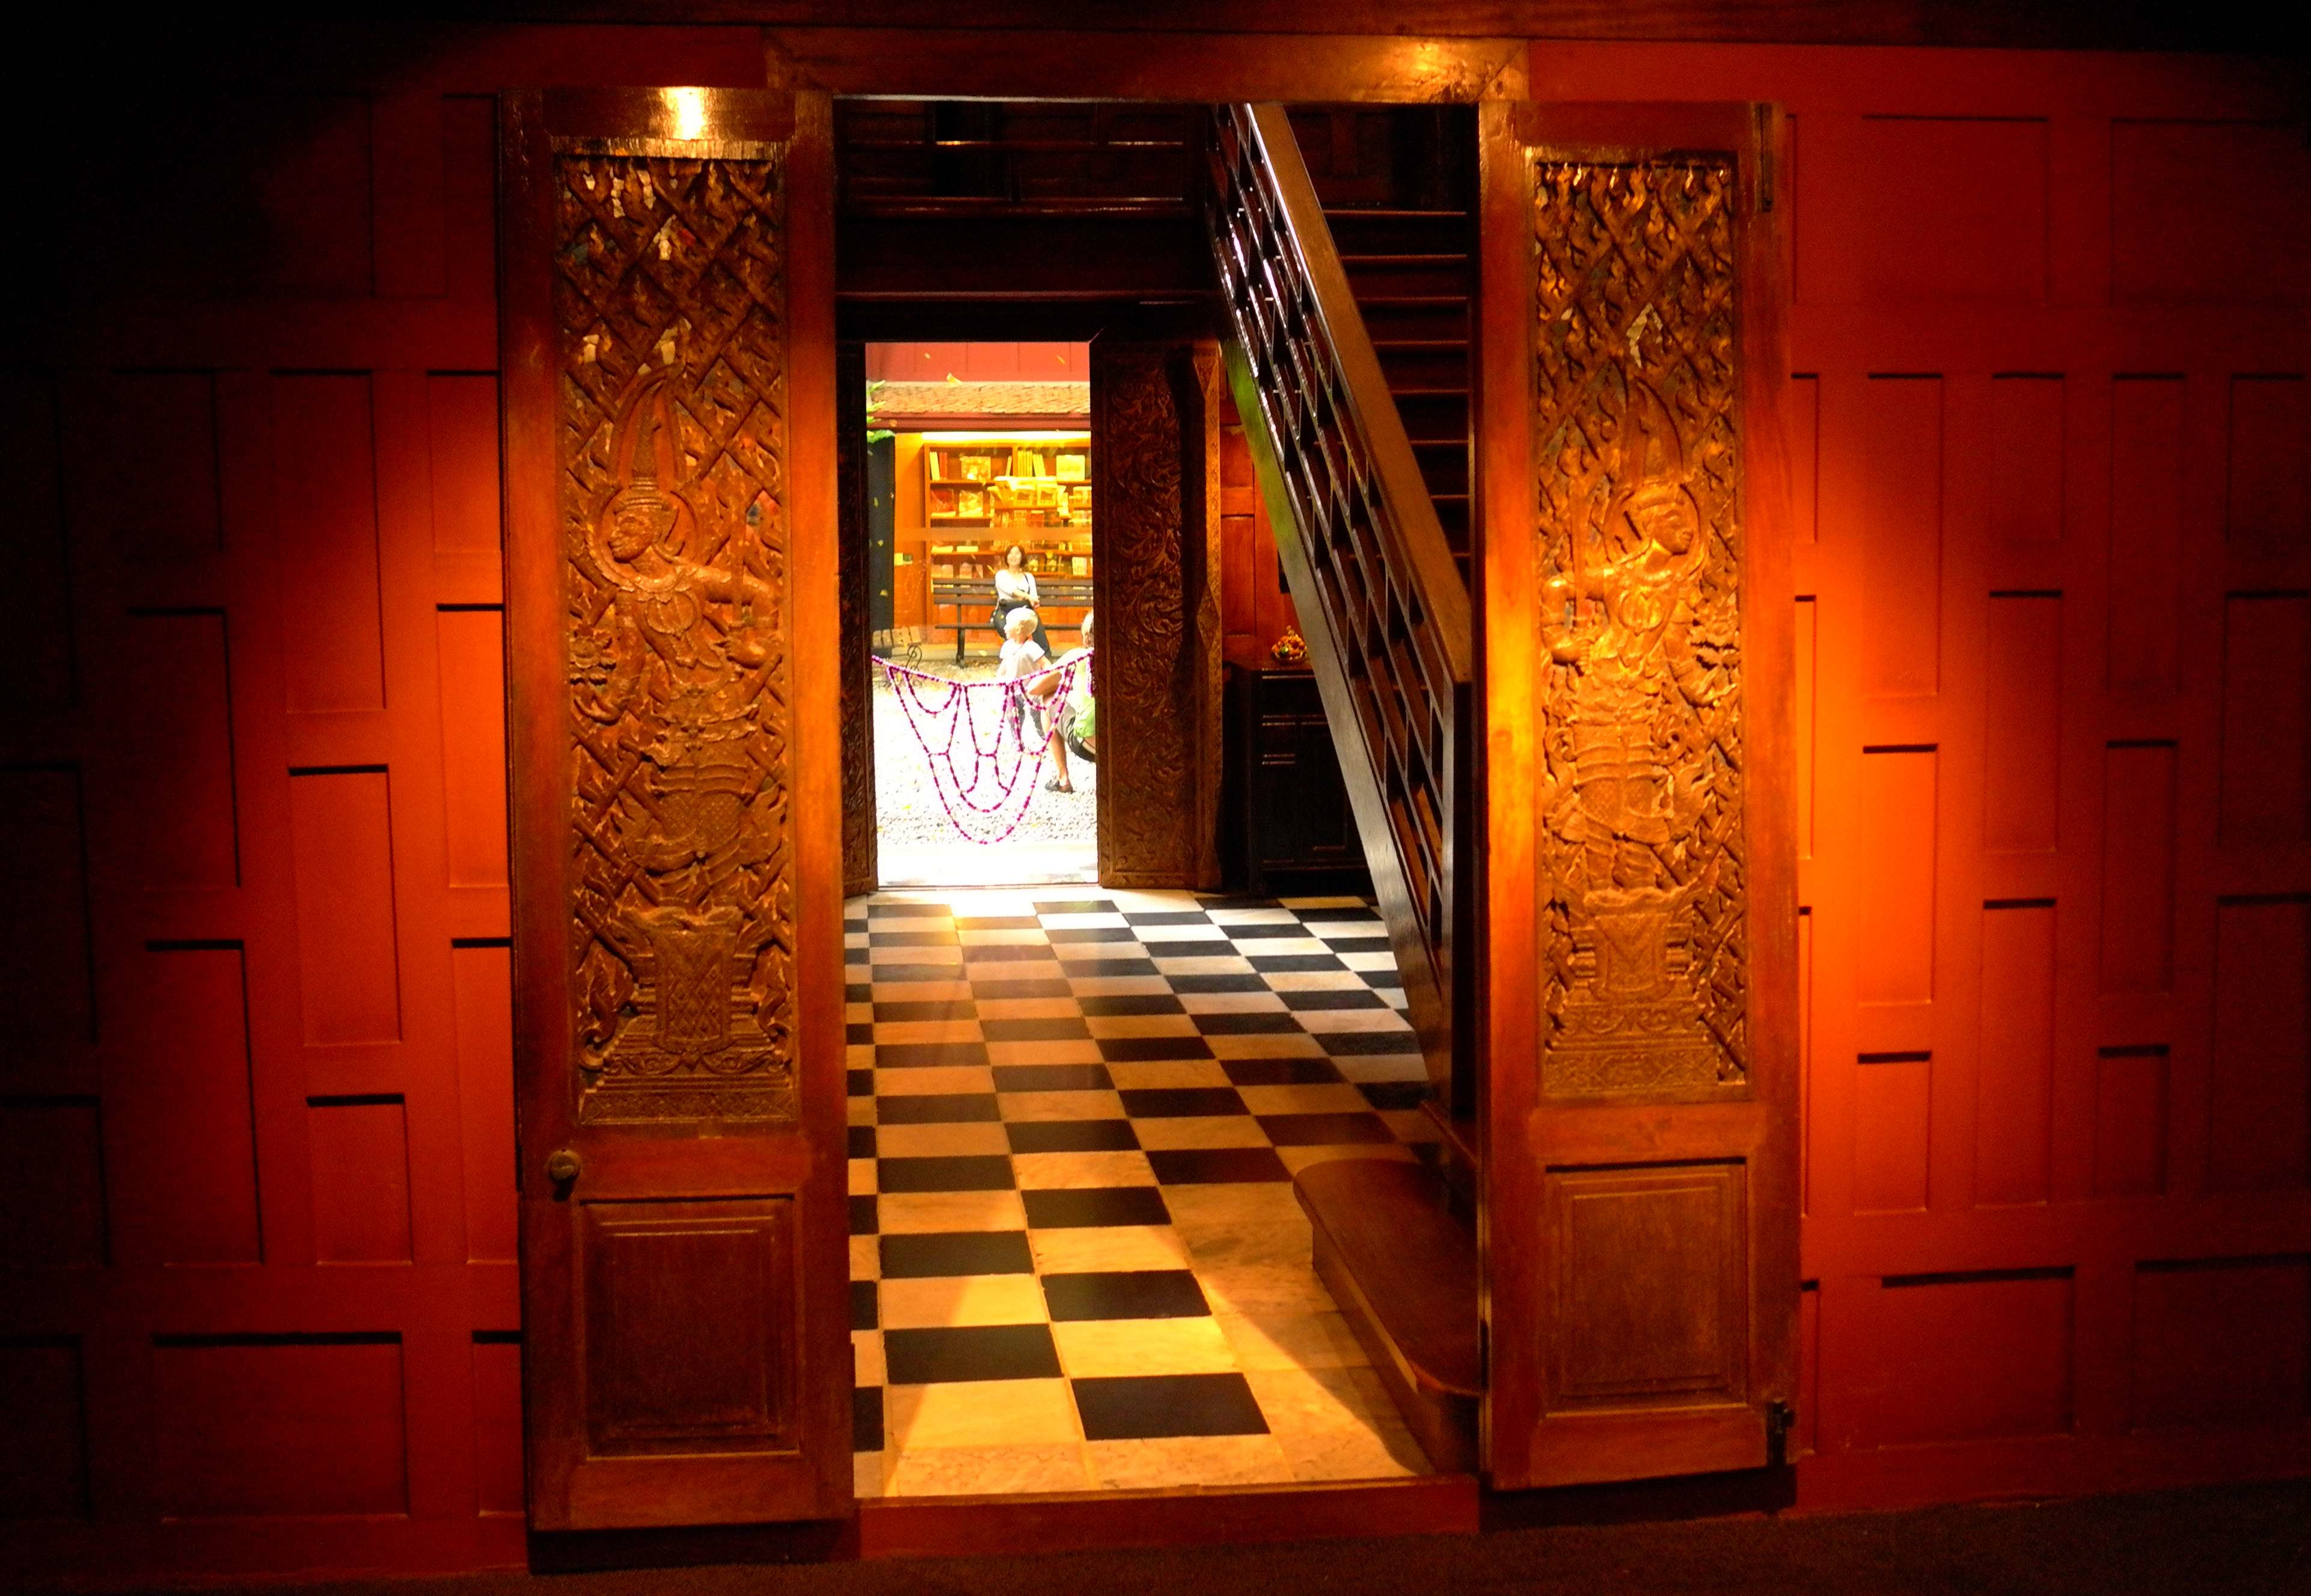 Detail of the entry hall of the Jim Thompson residence, showing interior stairway, black and white reclaimed Italian marble tiles and decorative carving on the doors (Photo Catherine Clover, 2013)